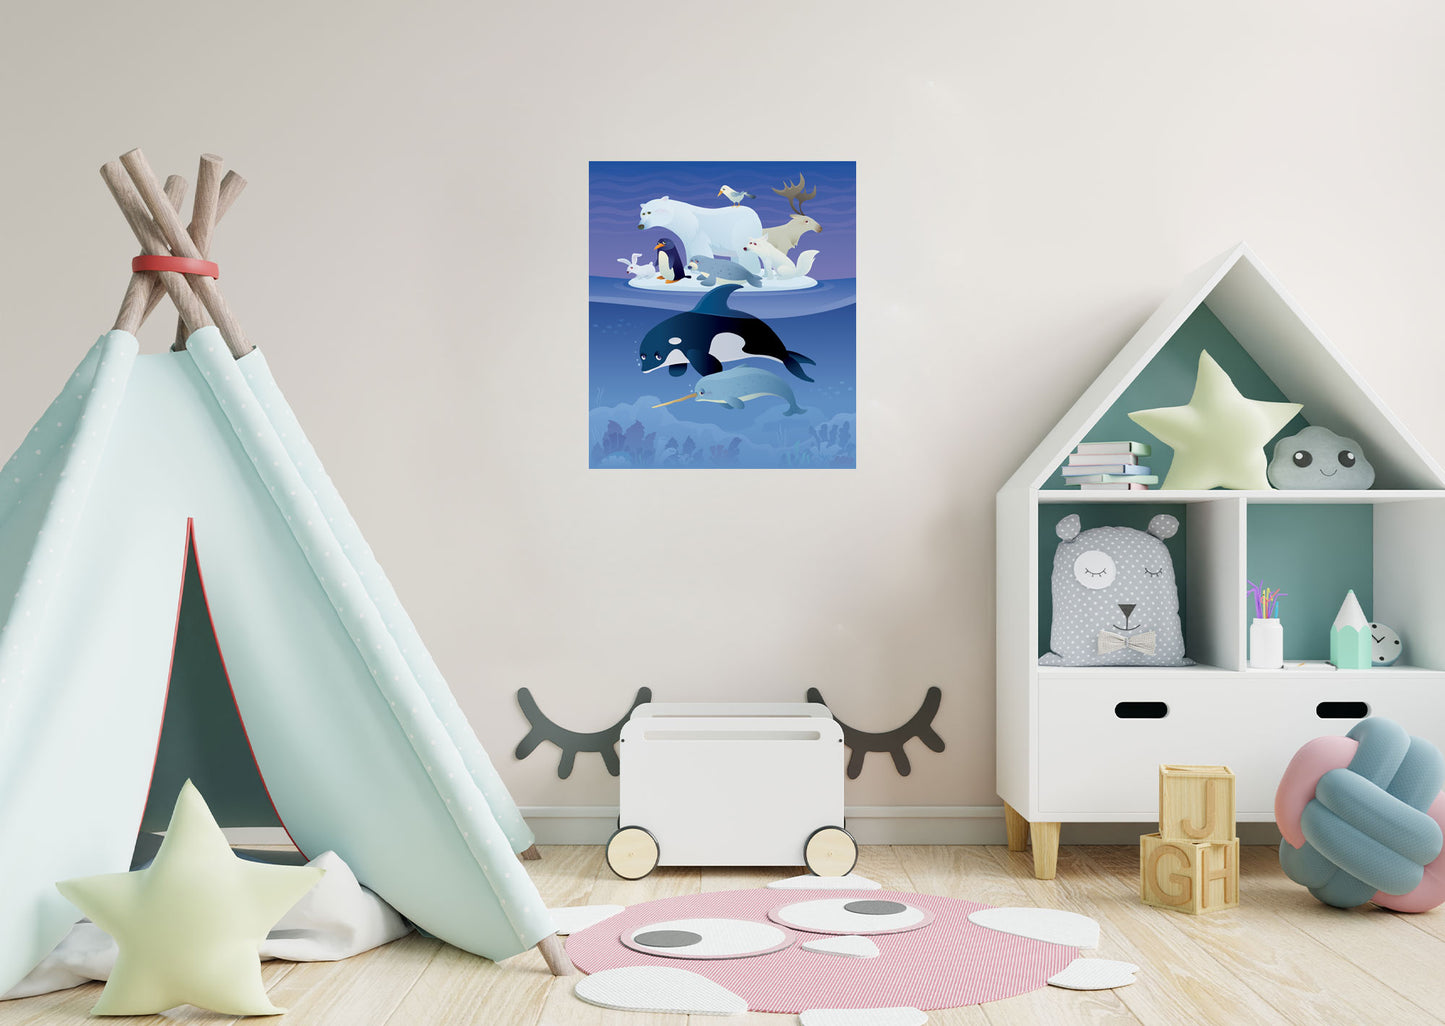 Nursery:  North Pole Mural        -   Removable Wall   Adhesive Decal